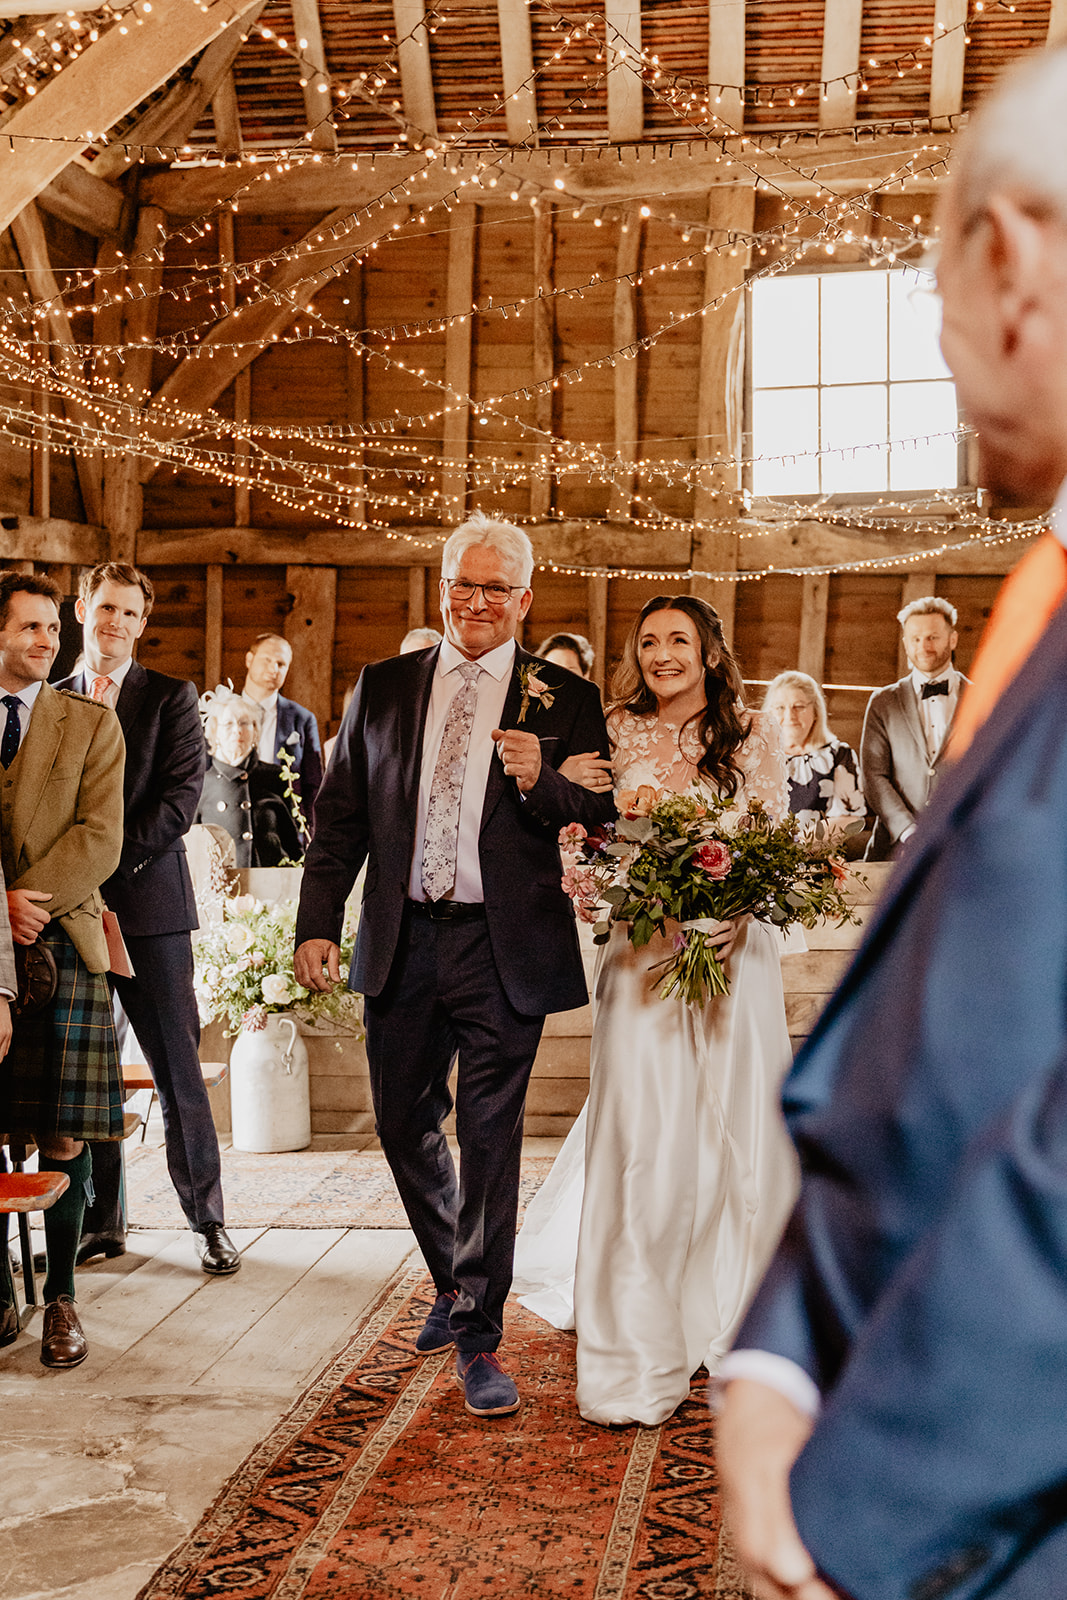 Bride and father at a Secret Barn Wedding, West Sussex. By Olive Joy Photography